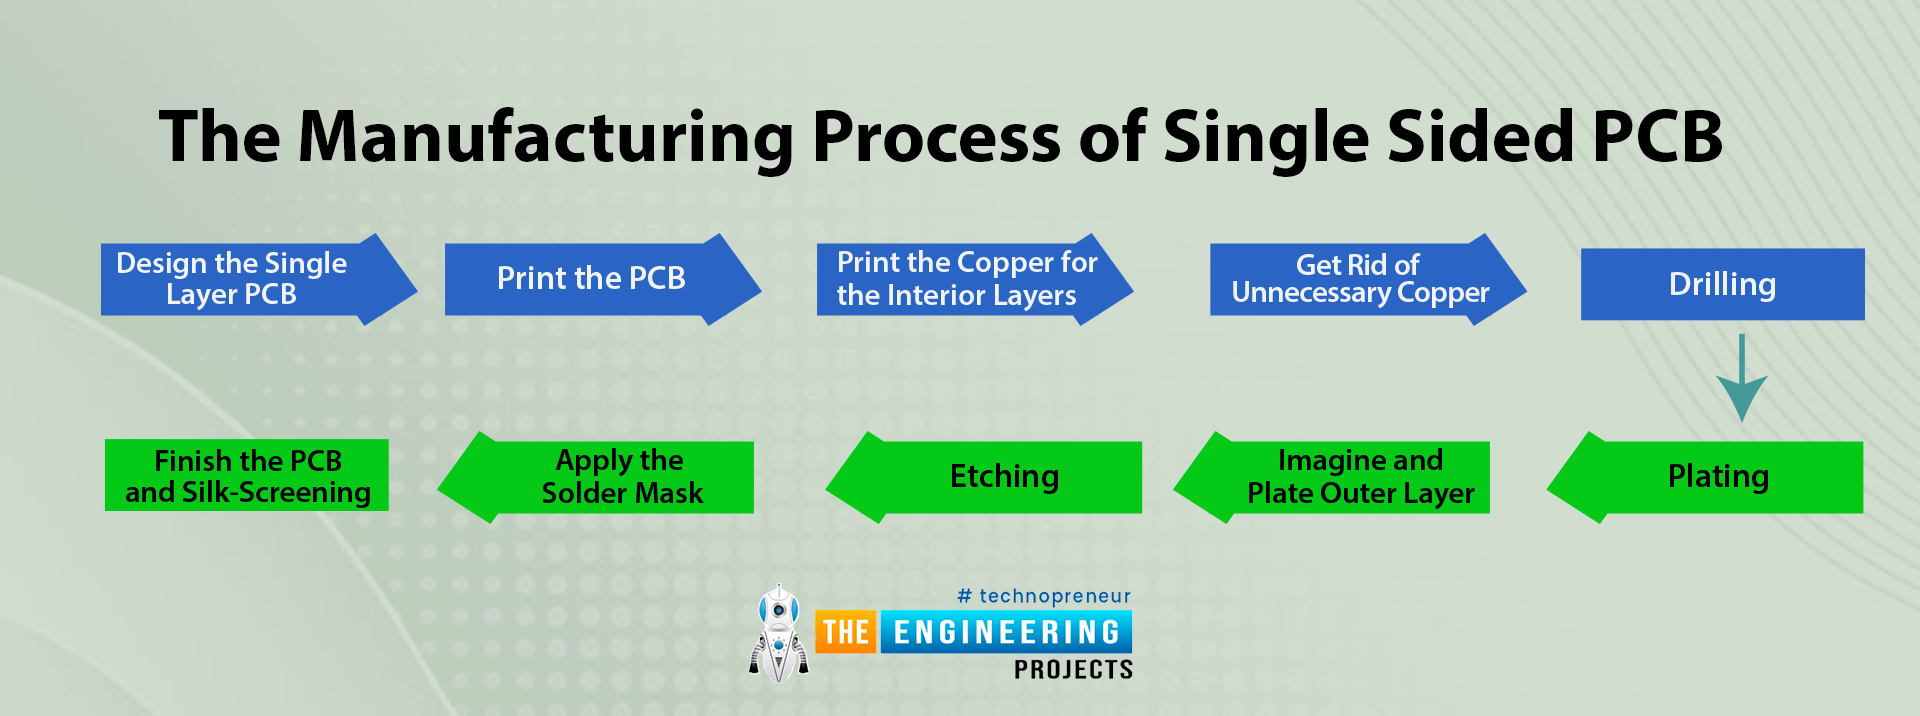 Single-layer PCB, Single-layer Definition, Construction of single layer, Types of singles layer PCB, Single layer manufacturing, Manufacturing process of single sided PCB